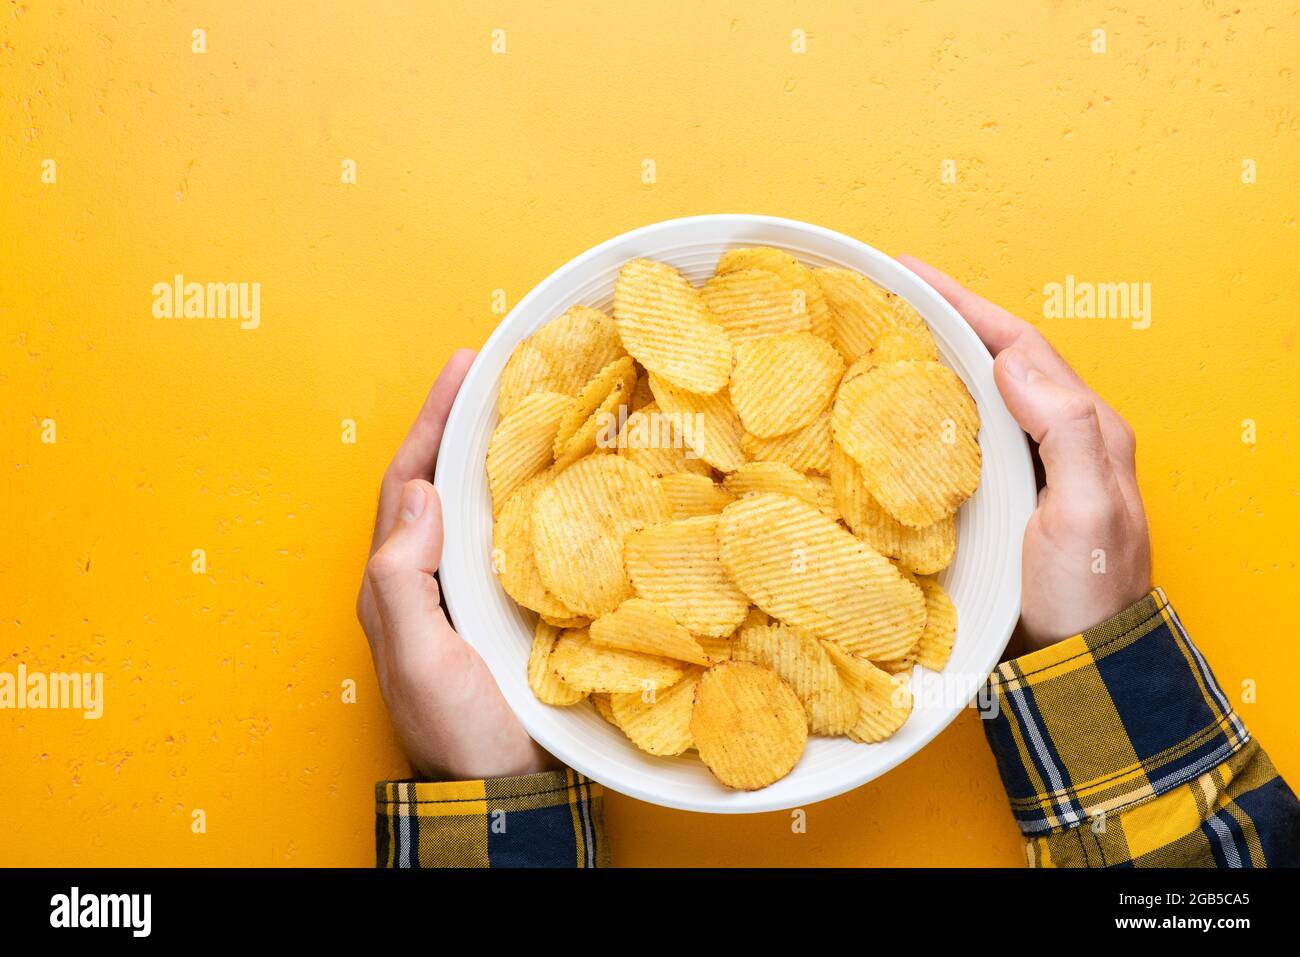 Potato chips or crisps in bowl in male hands over yellow background, top view, copy space. Superbowl snack, junk food Stock Photo